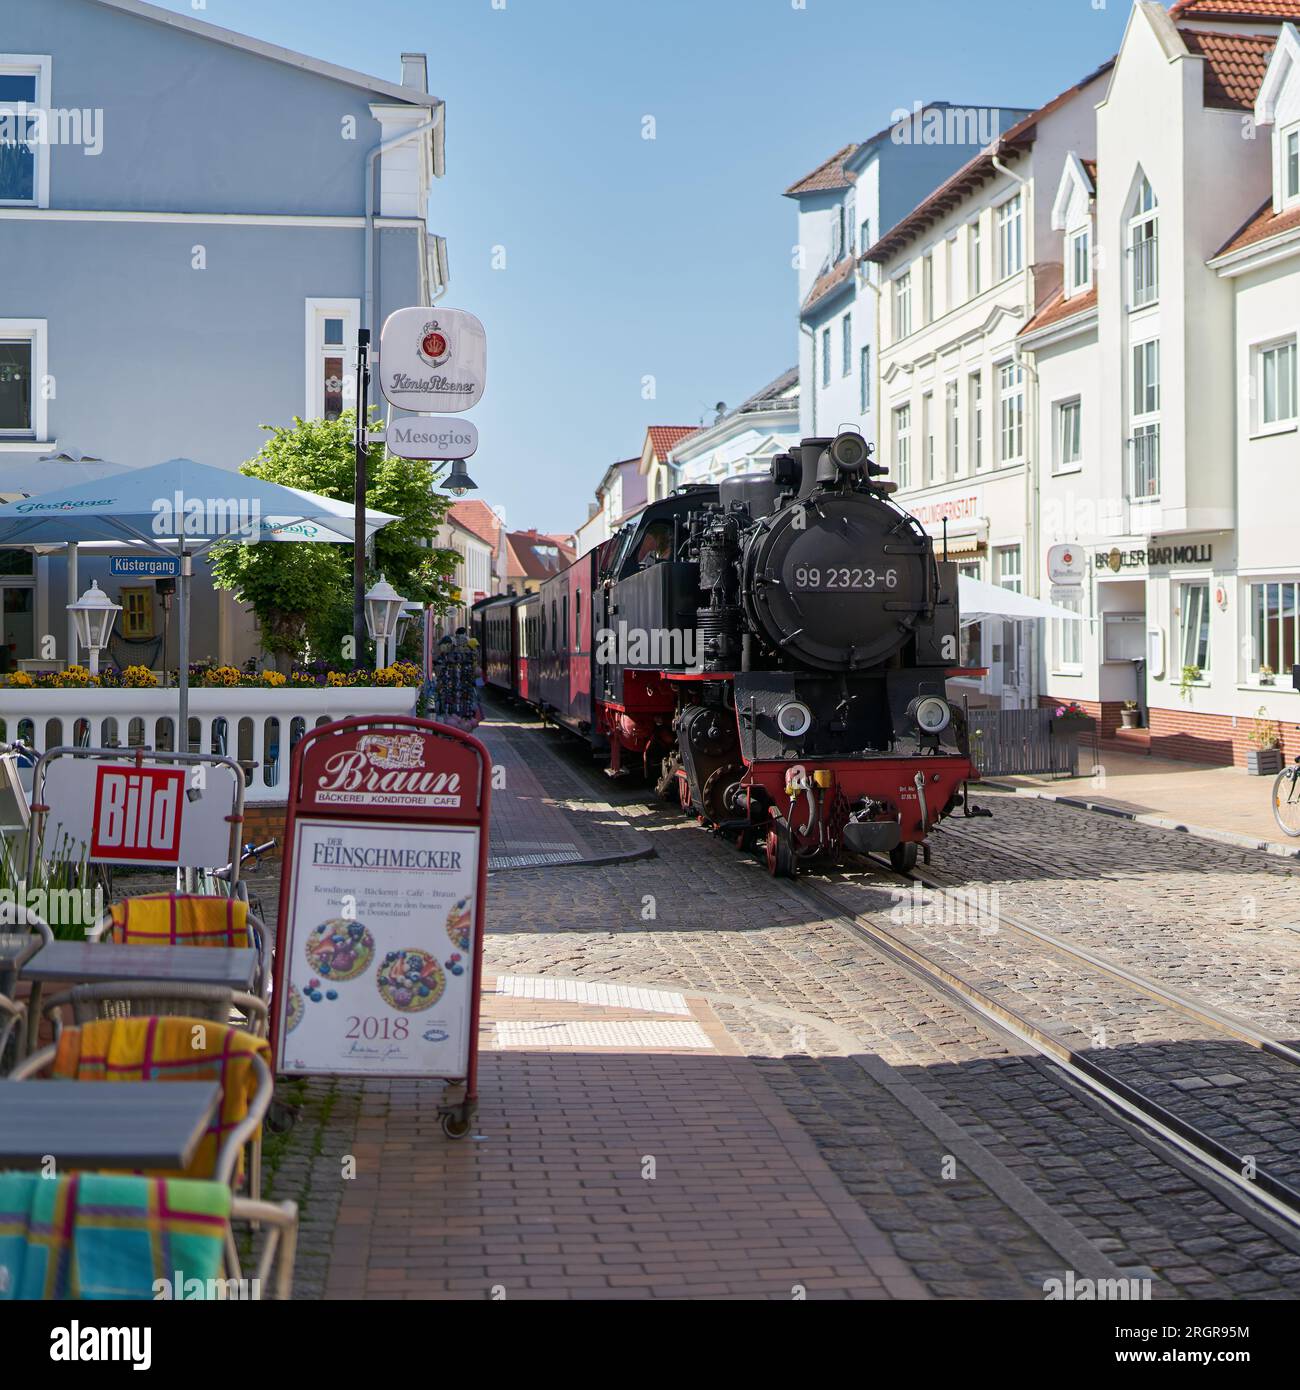 Passenger train of the tourist train Bäderbahn Molli during your journey through the old town of Bad Doberan at the German Baltic Sea Stock Photo